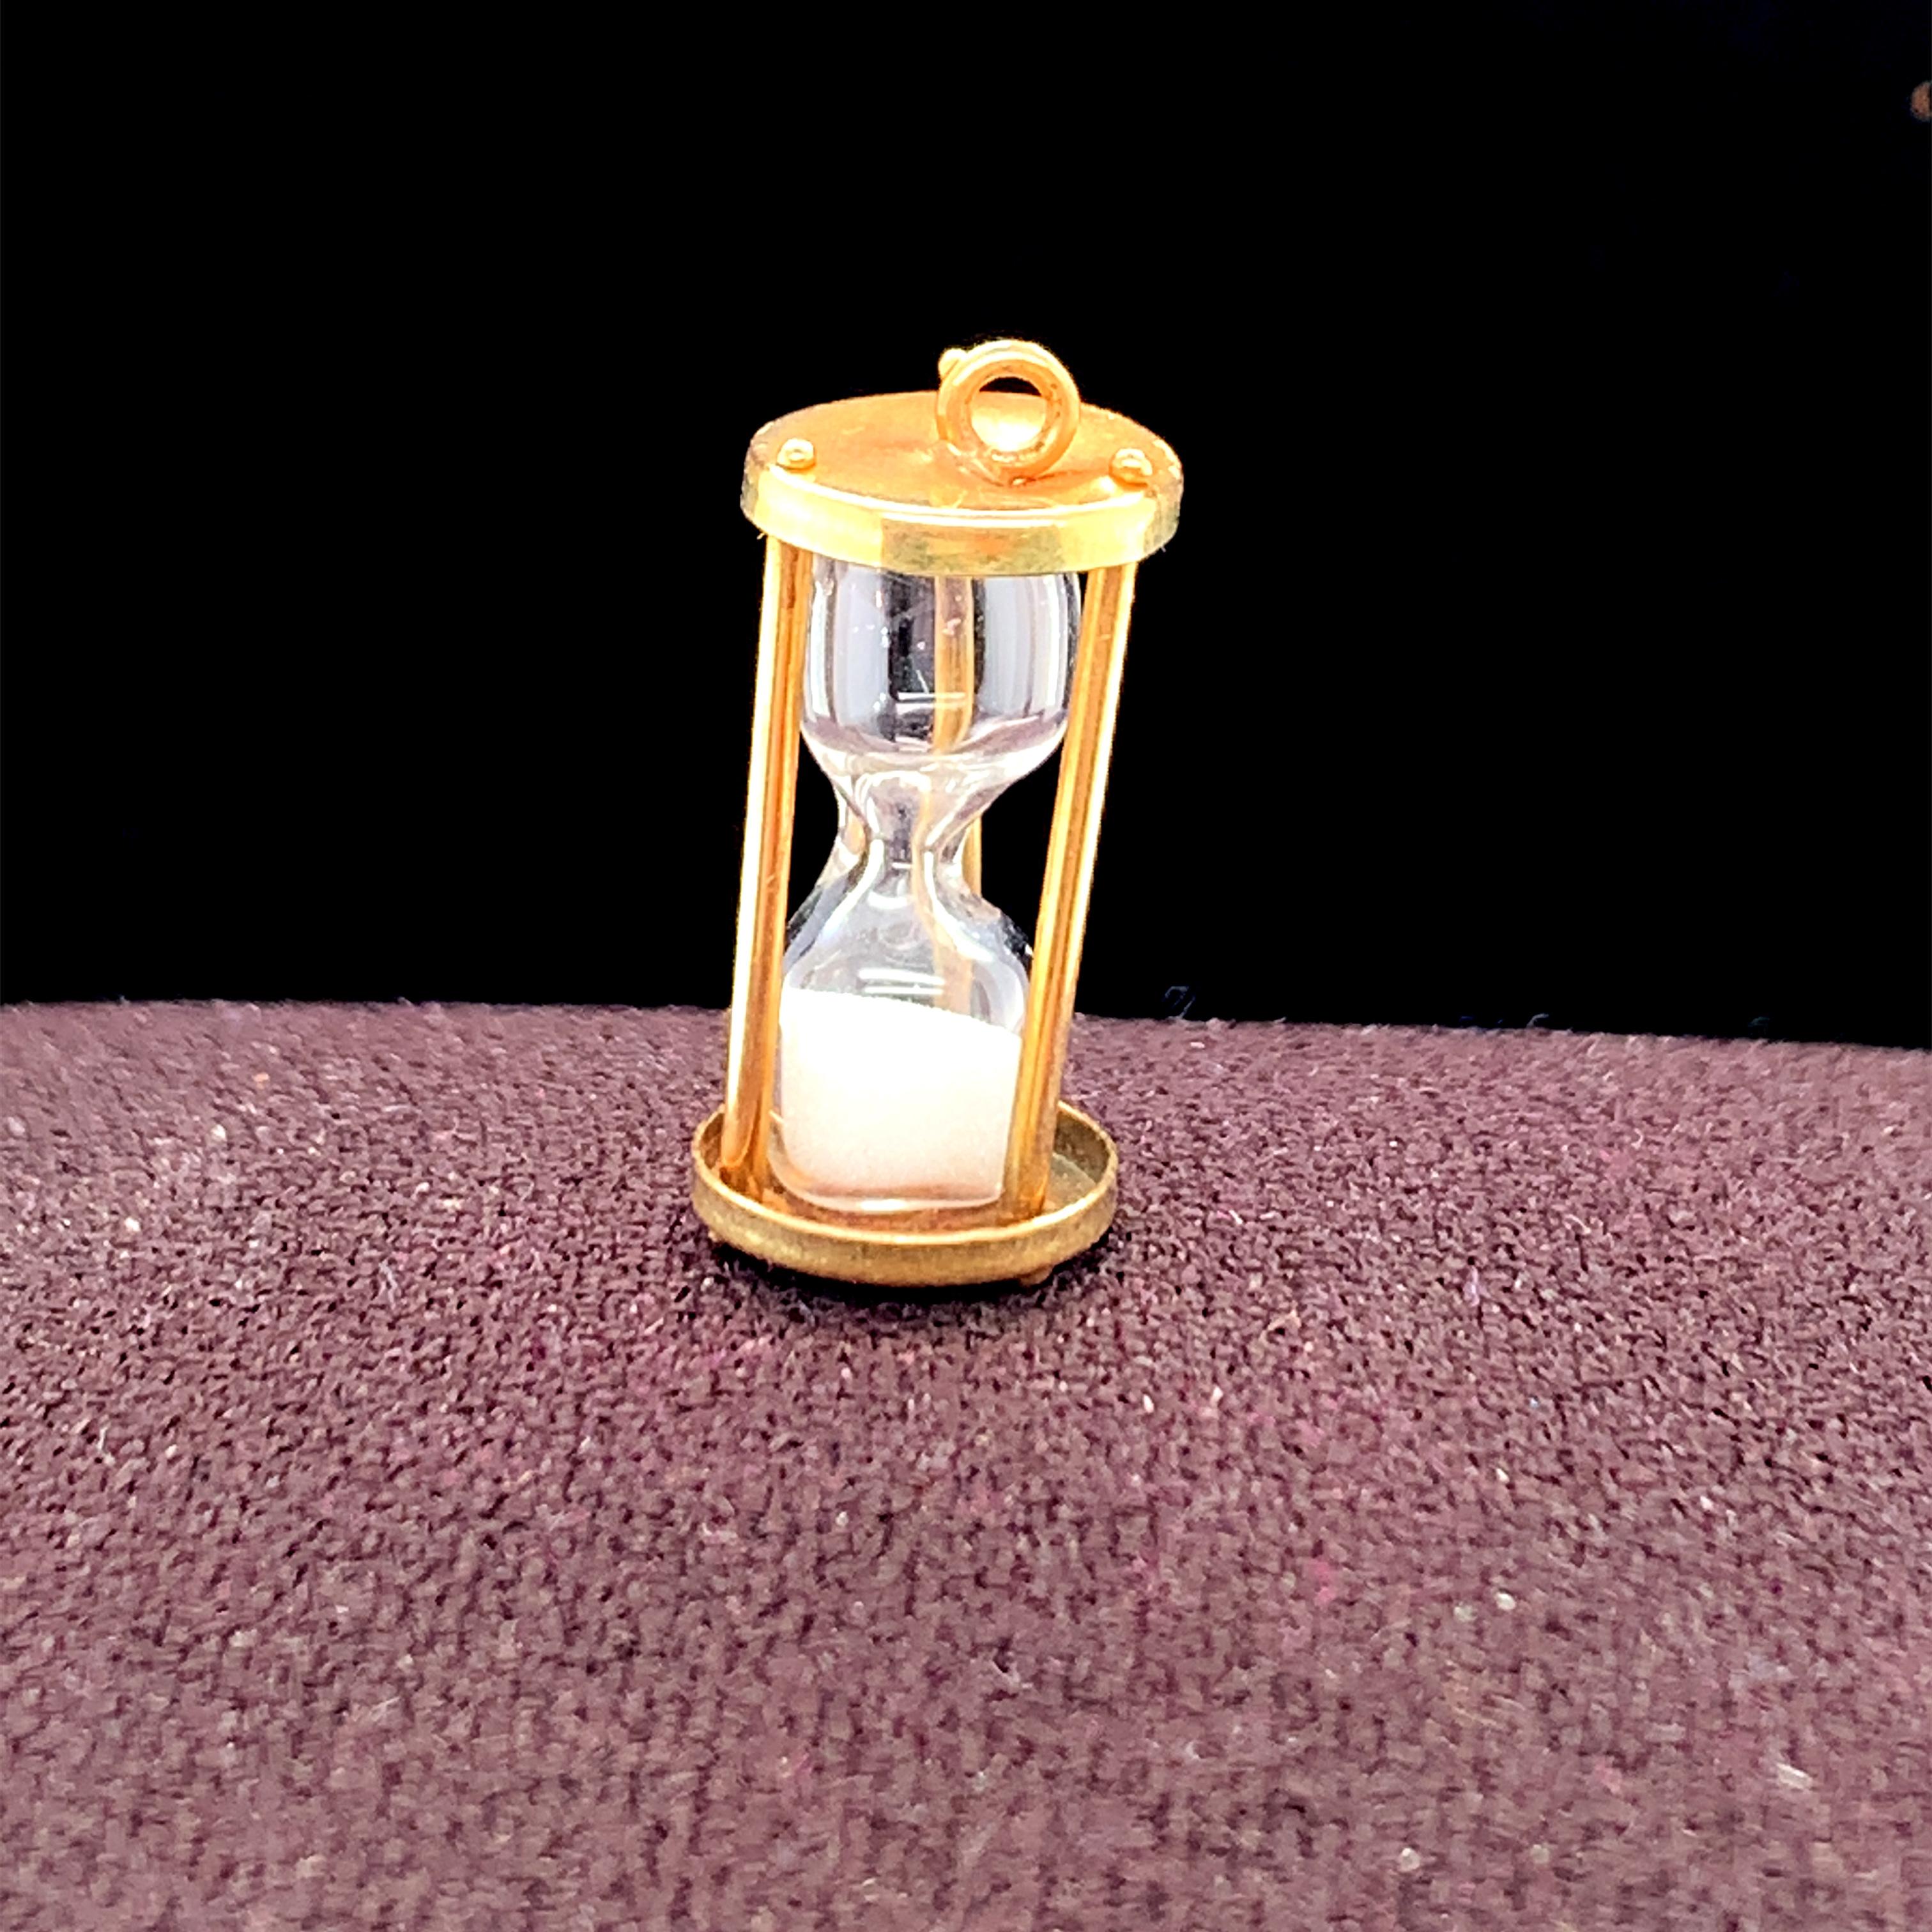 Year: 1980s

Item Details: 
Metal Type: 14K Yellow Gold  [Hallmarked, and Tested]
Weight:  1.6 grams

Pendant Measurement: 18.4mm x 7.5mm
Condition:  Excellent


Price: $400

Payment & Refund Details:
*More Pictures Available on Request*

Payment